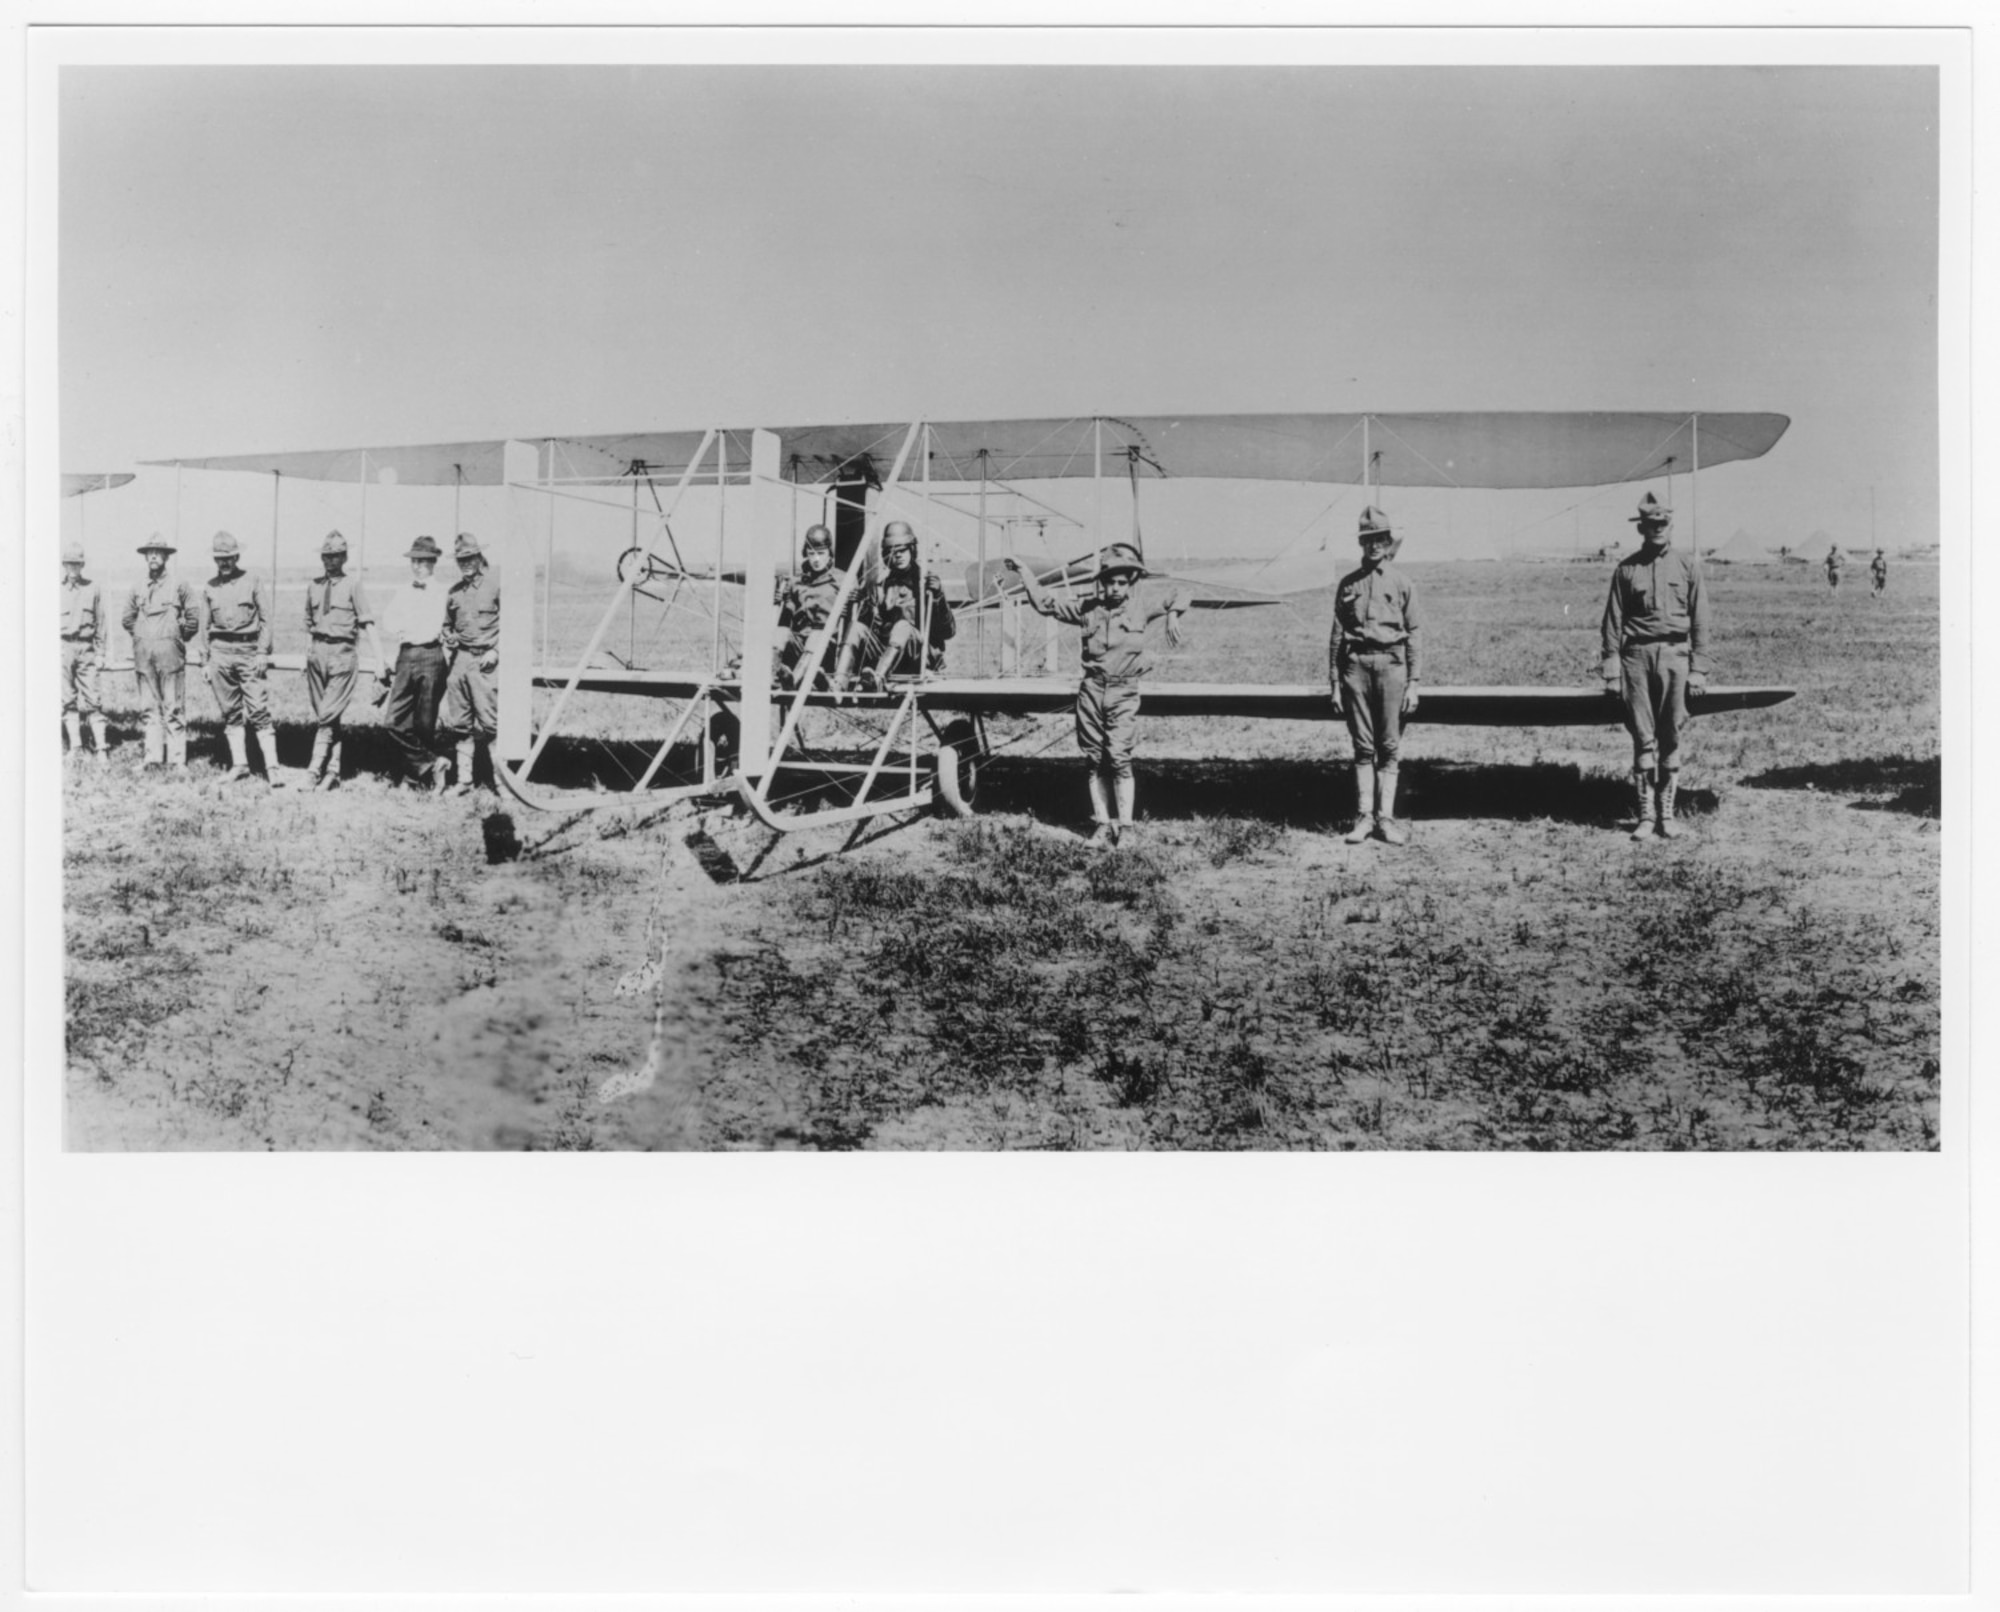 In the year of the 1st Aero Squadron's formation, Lt. Thomas D. Milling, instructor, and Lt. Fred Seydel, student, are at the controls of a Wright C., SC-16 Trainer on airfield in Texas City, Texas, May 1913. In front of the plane, 8 other soldiers in uniform and a civilian in white shirt and bow tie stand posed facing the camera. (U.S. Air Force Museum Courtesy photo)